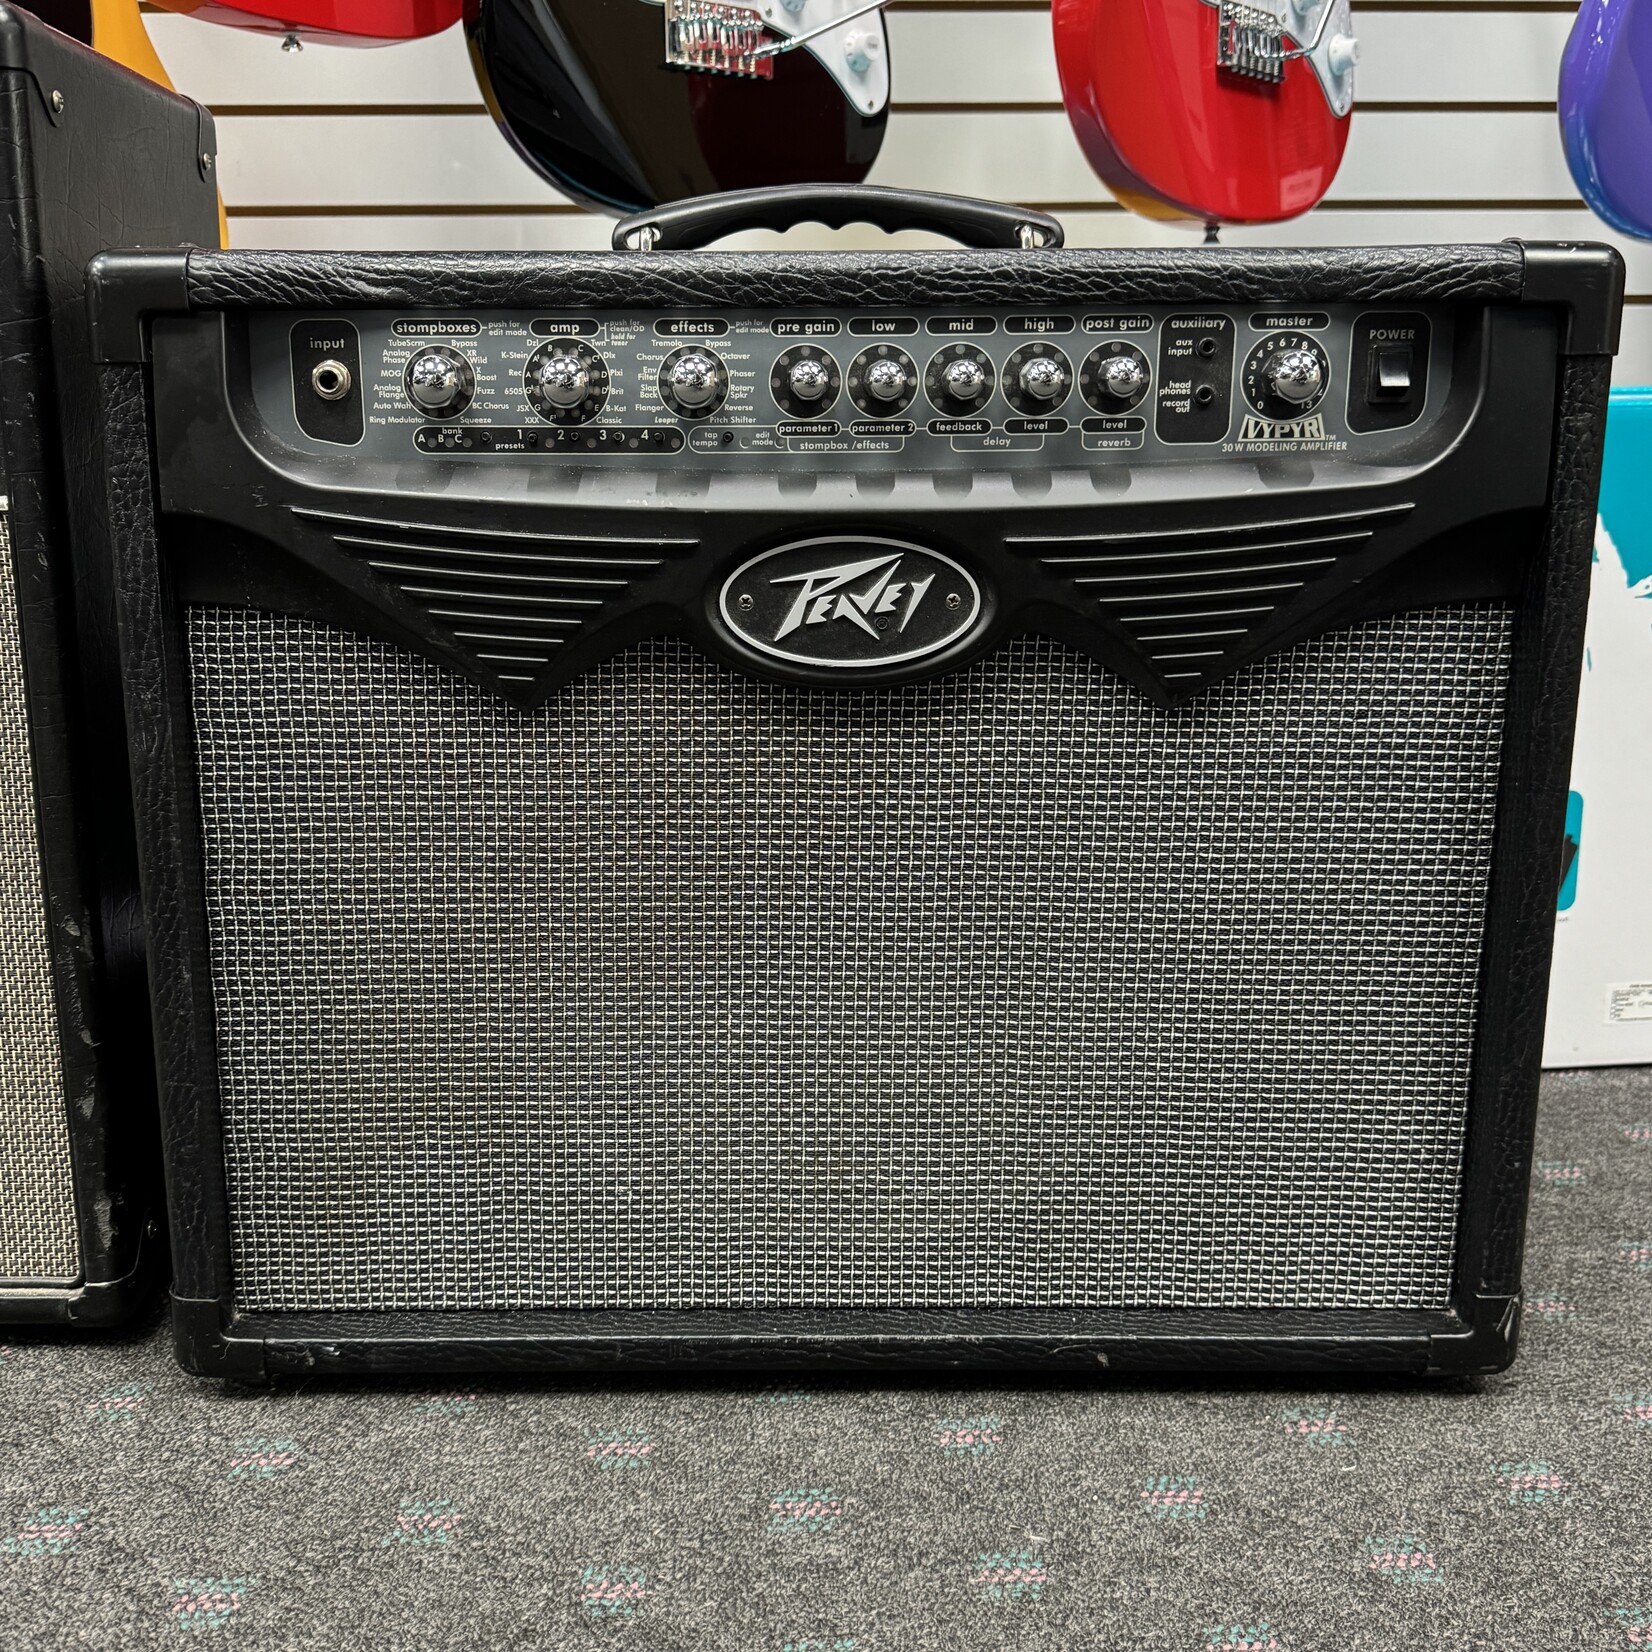 Peavey Vypyr 30 1x12 30W Guitar Combo Amp - (Used)